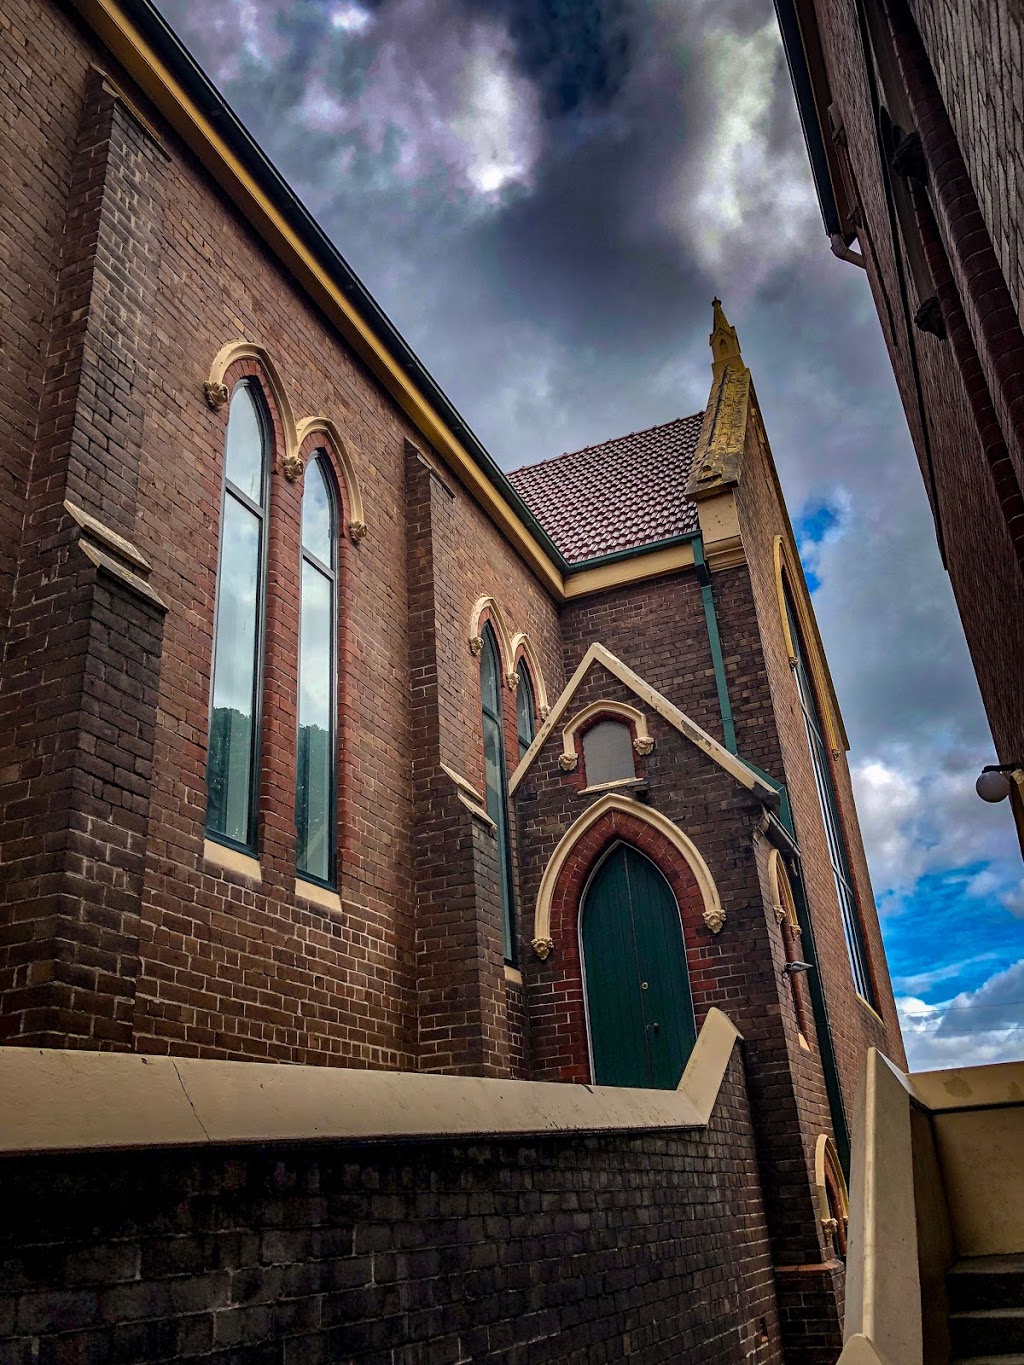 Stanmore Baptist Church | 140 Albany Rd, Stanmore NSW 2048, Australia | Phone: (02) 9572 9389